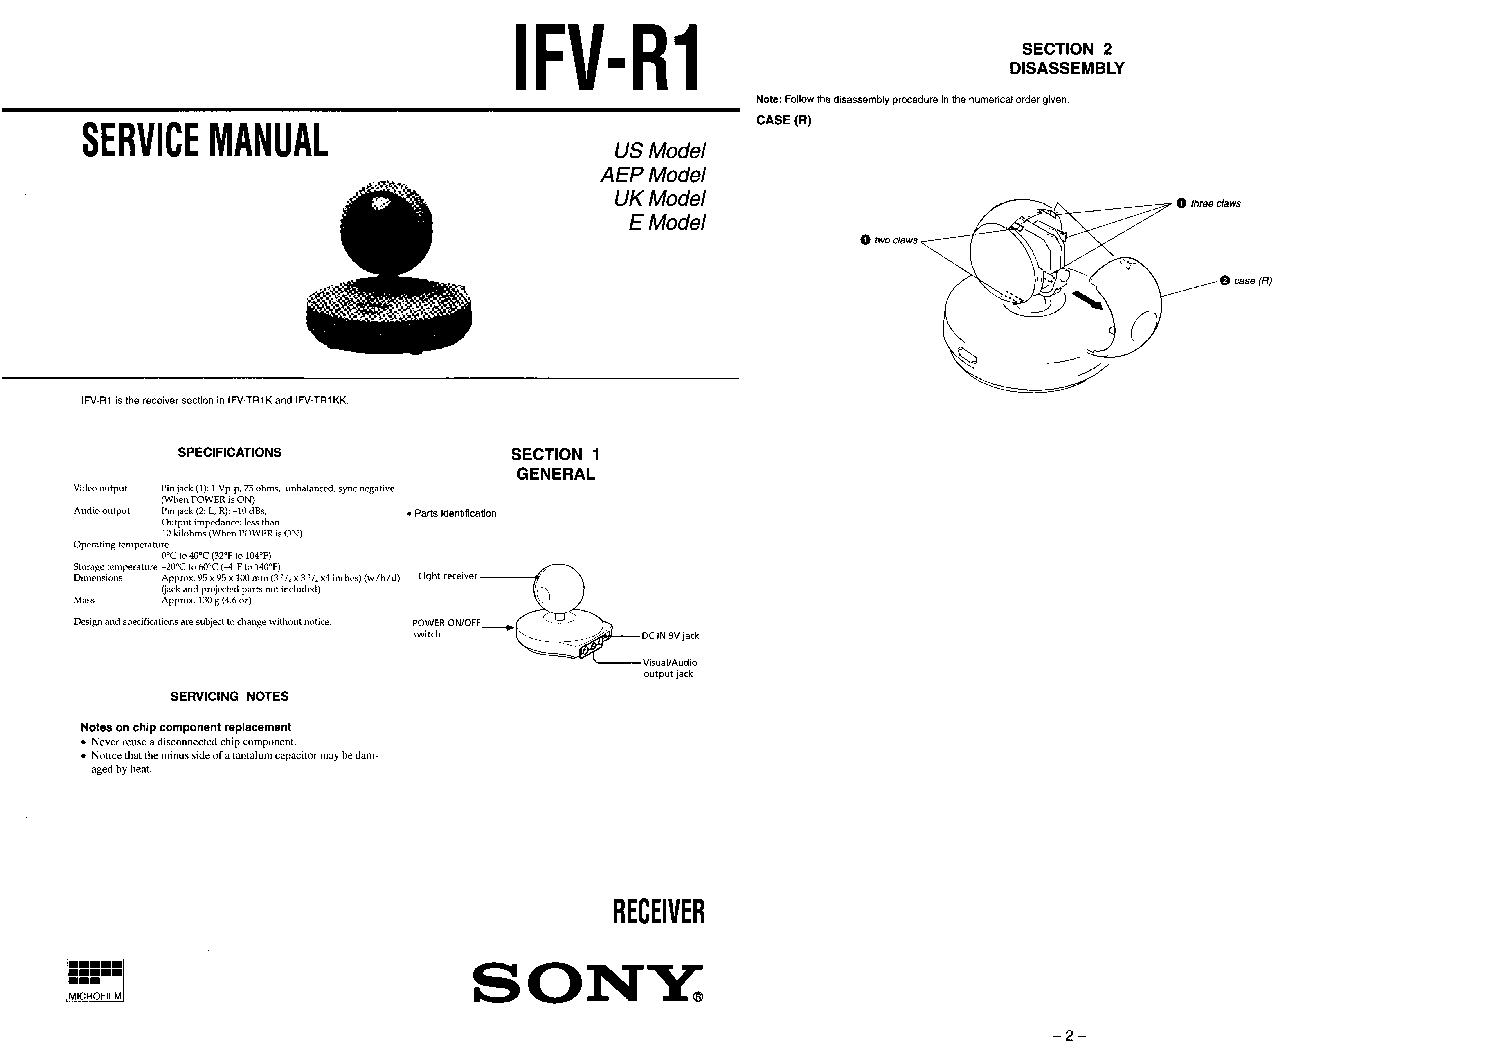 SONY IFV-R1 SM service manual (1st page)